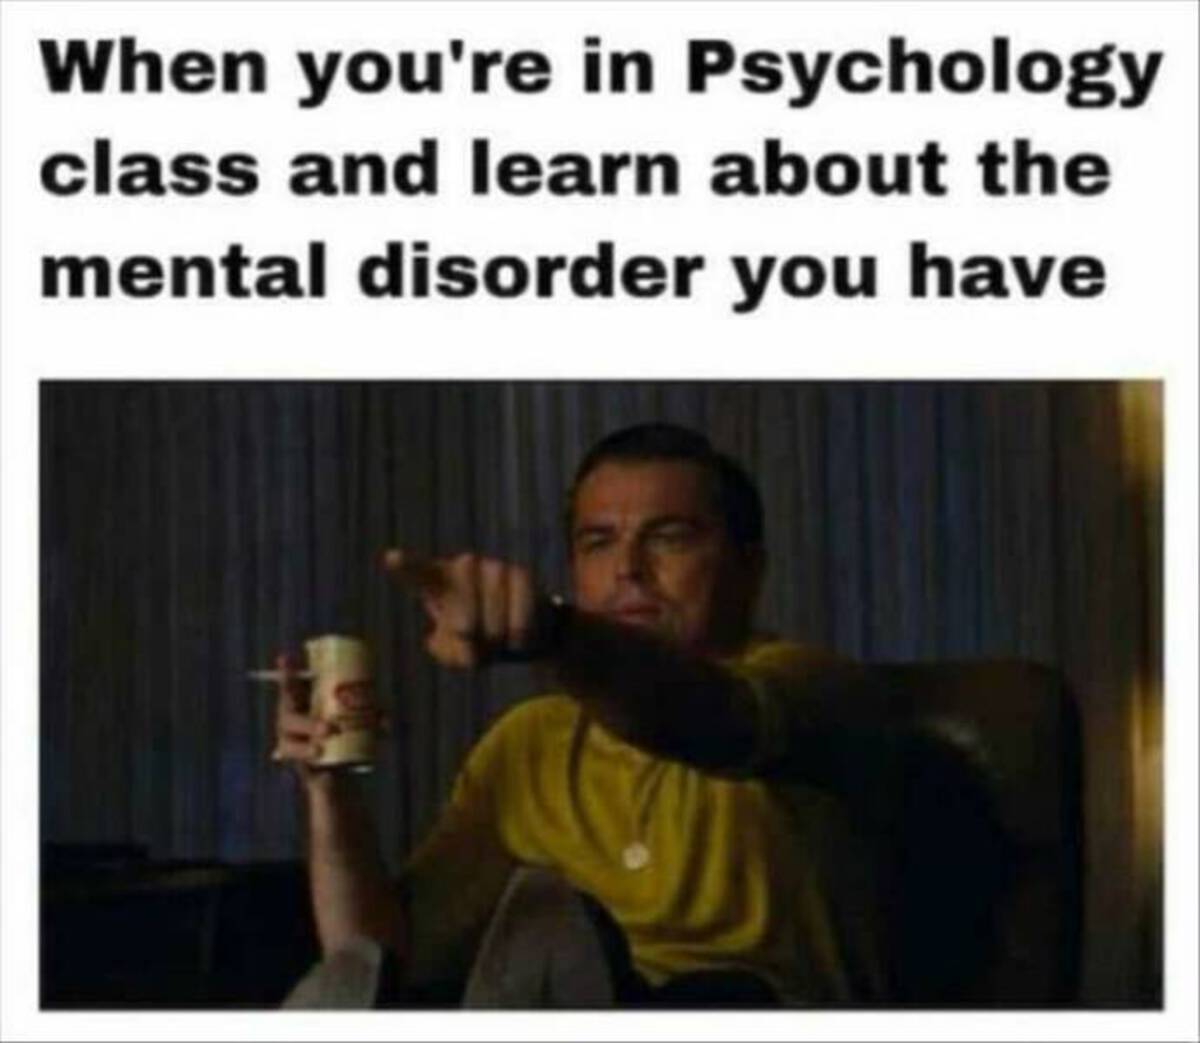 photo caption - When you're in Psychology class and learn about the mental disorder you have